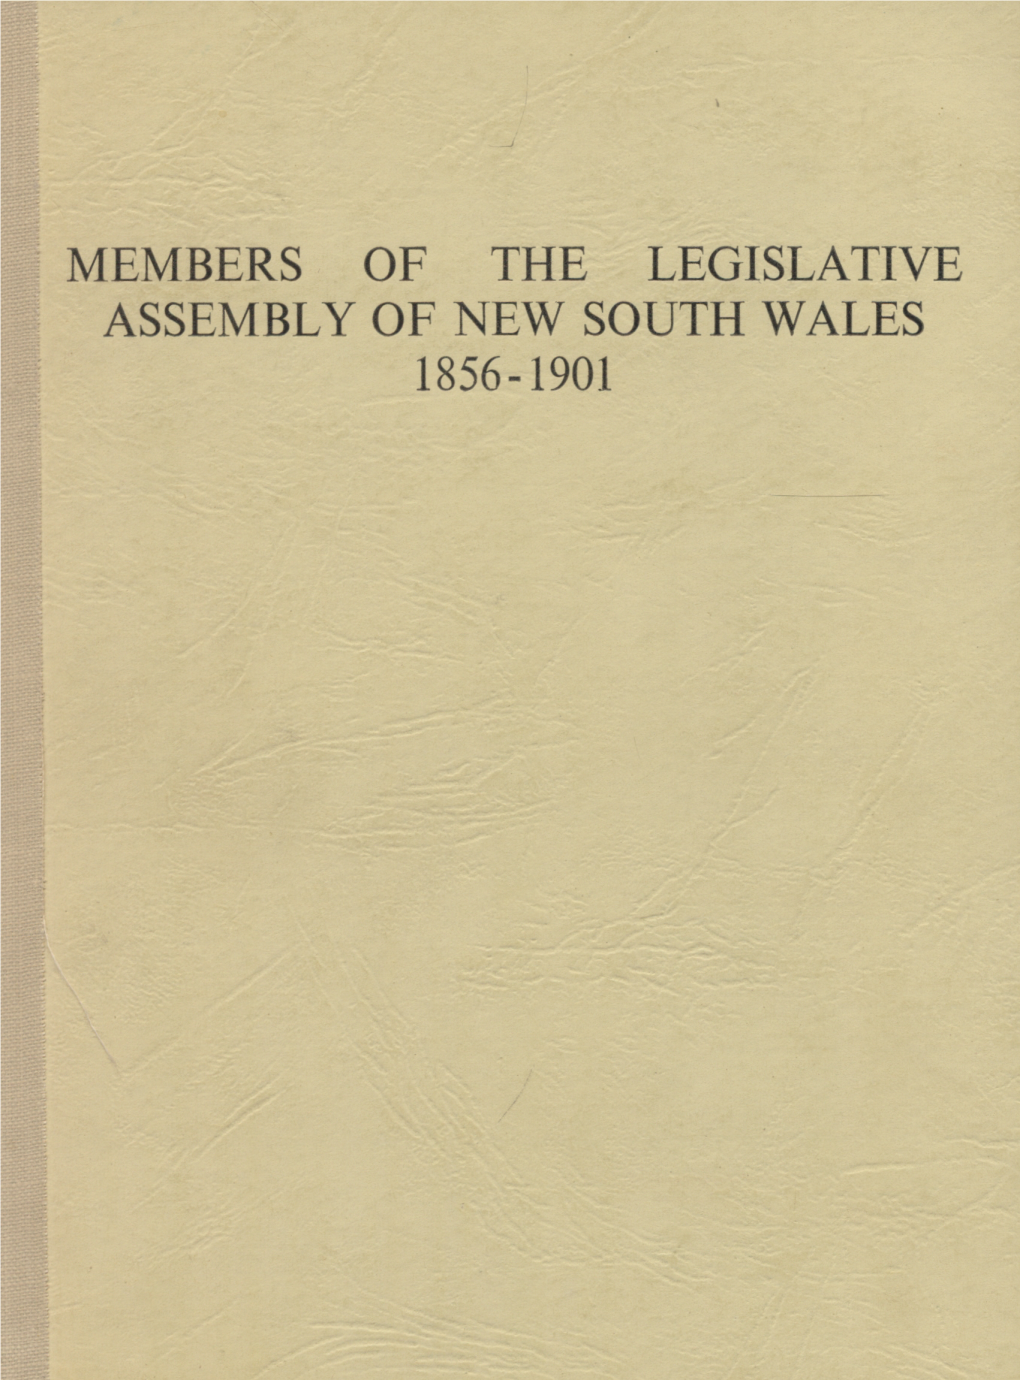 Members of the Legislative Assembly of New South Wales 1856-1901 Members of the Legislative Assembly of New South Wales 1856-1901